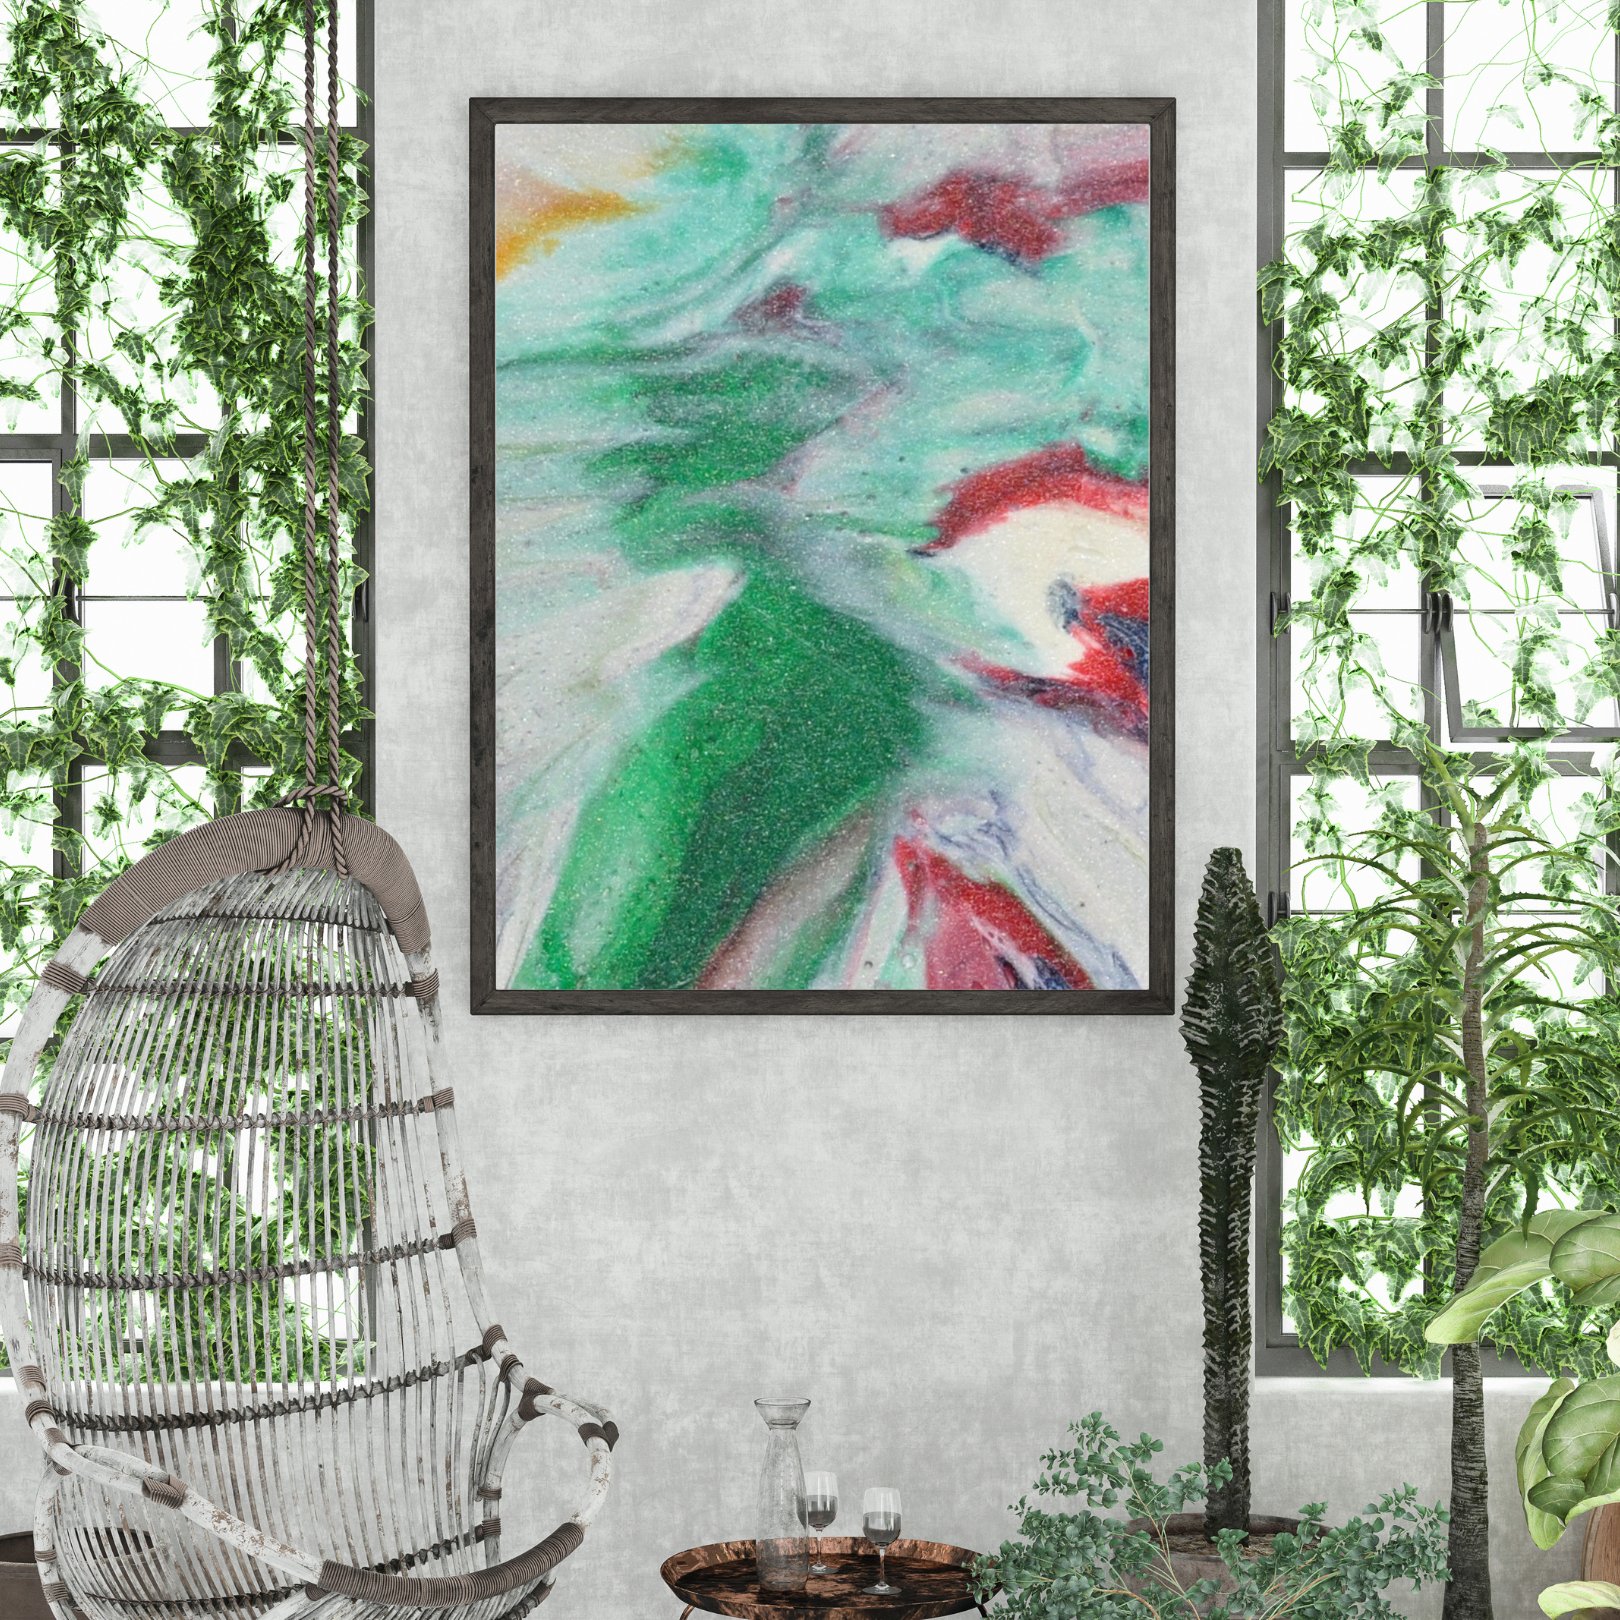 Green River Digital Wall Art by Jagoda Jay Sudak Keshani August 2019 abstract red green recycled plastic nft pdf wall decor printable instant download melted plastic 